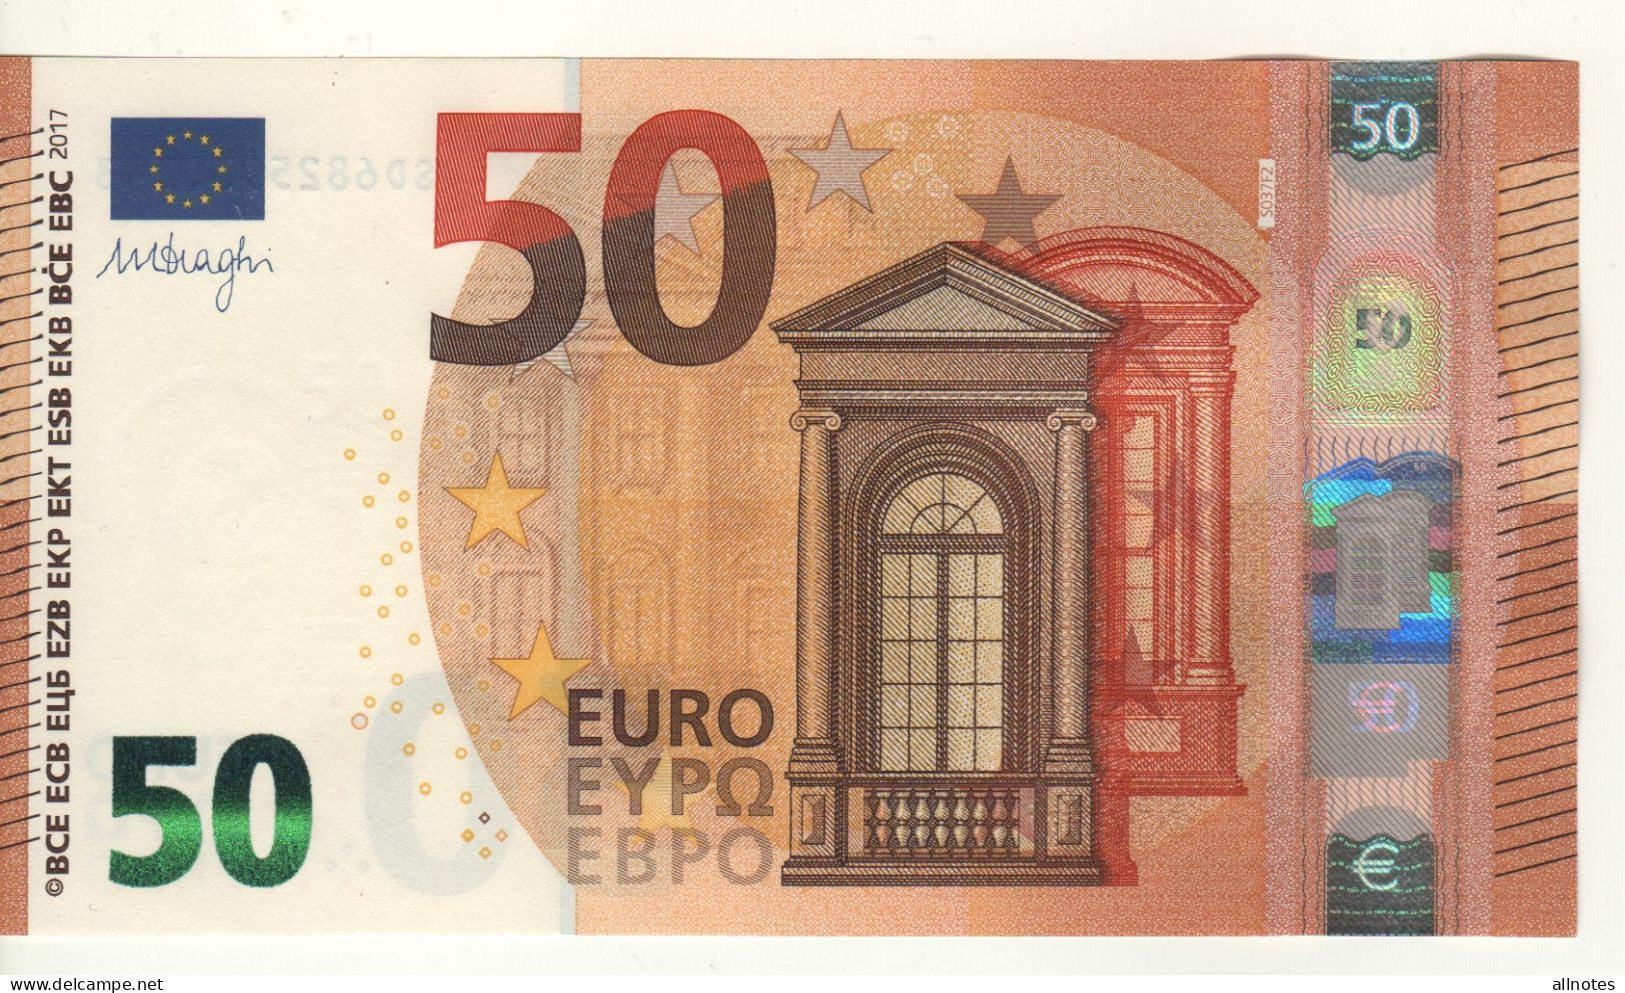 50 EURO  'Italy'  DRAGHI  S 037 F2   SD6825930761 /   FDS - UNC - 50 Euro